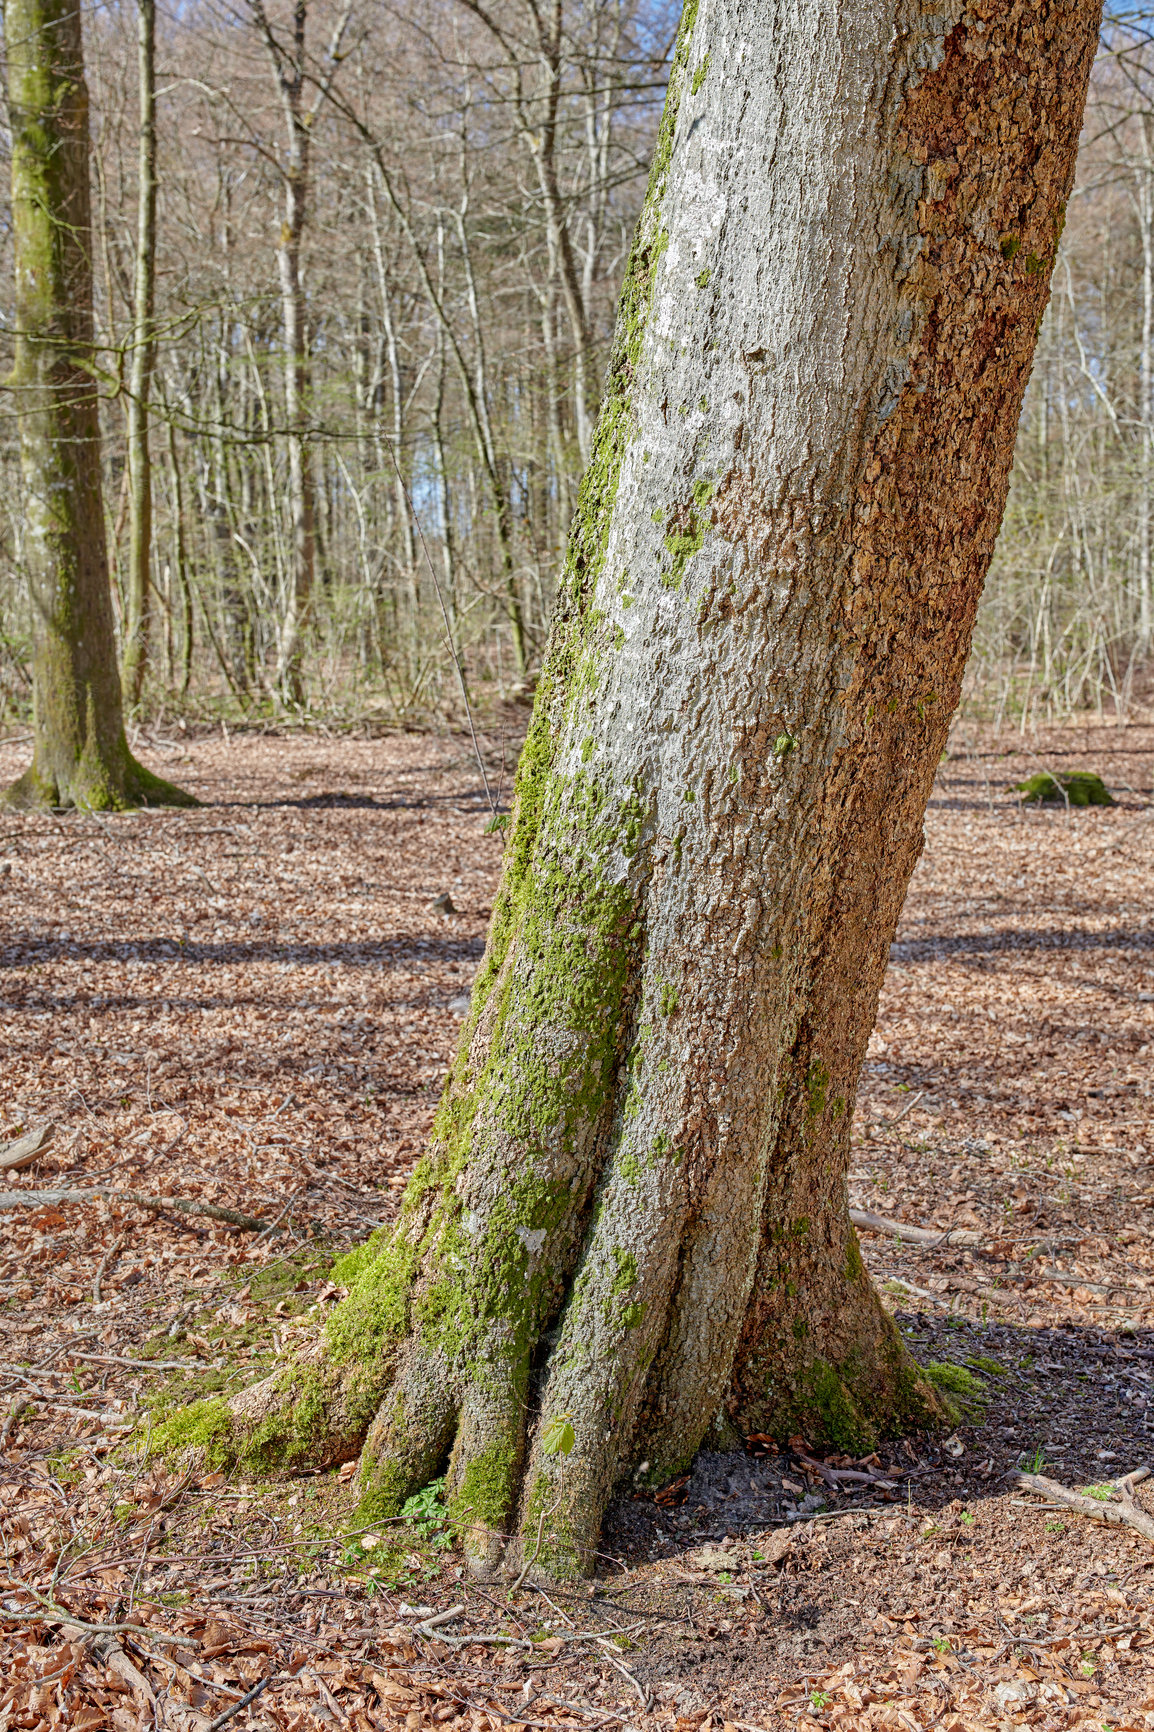 Buy stock photo Leafless trees in a forest with a bit of regrowth developing in early spring. A dry quiet landscape of lots of bare tree trunks covered in moss and branches in a wild undisturbed nature environment